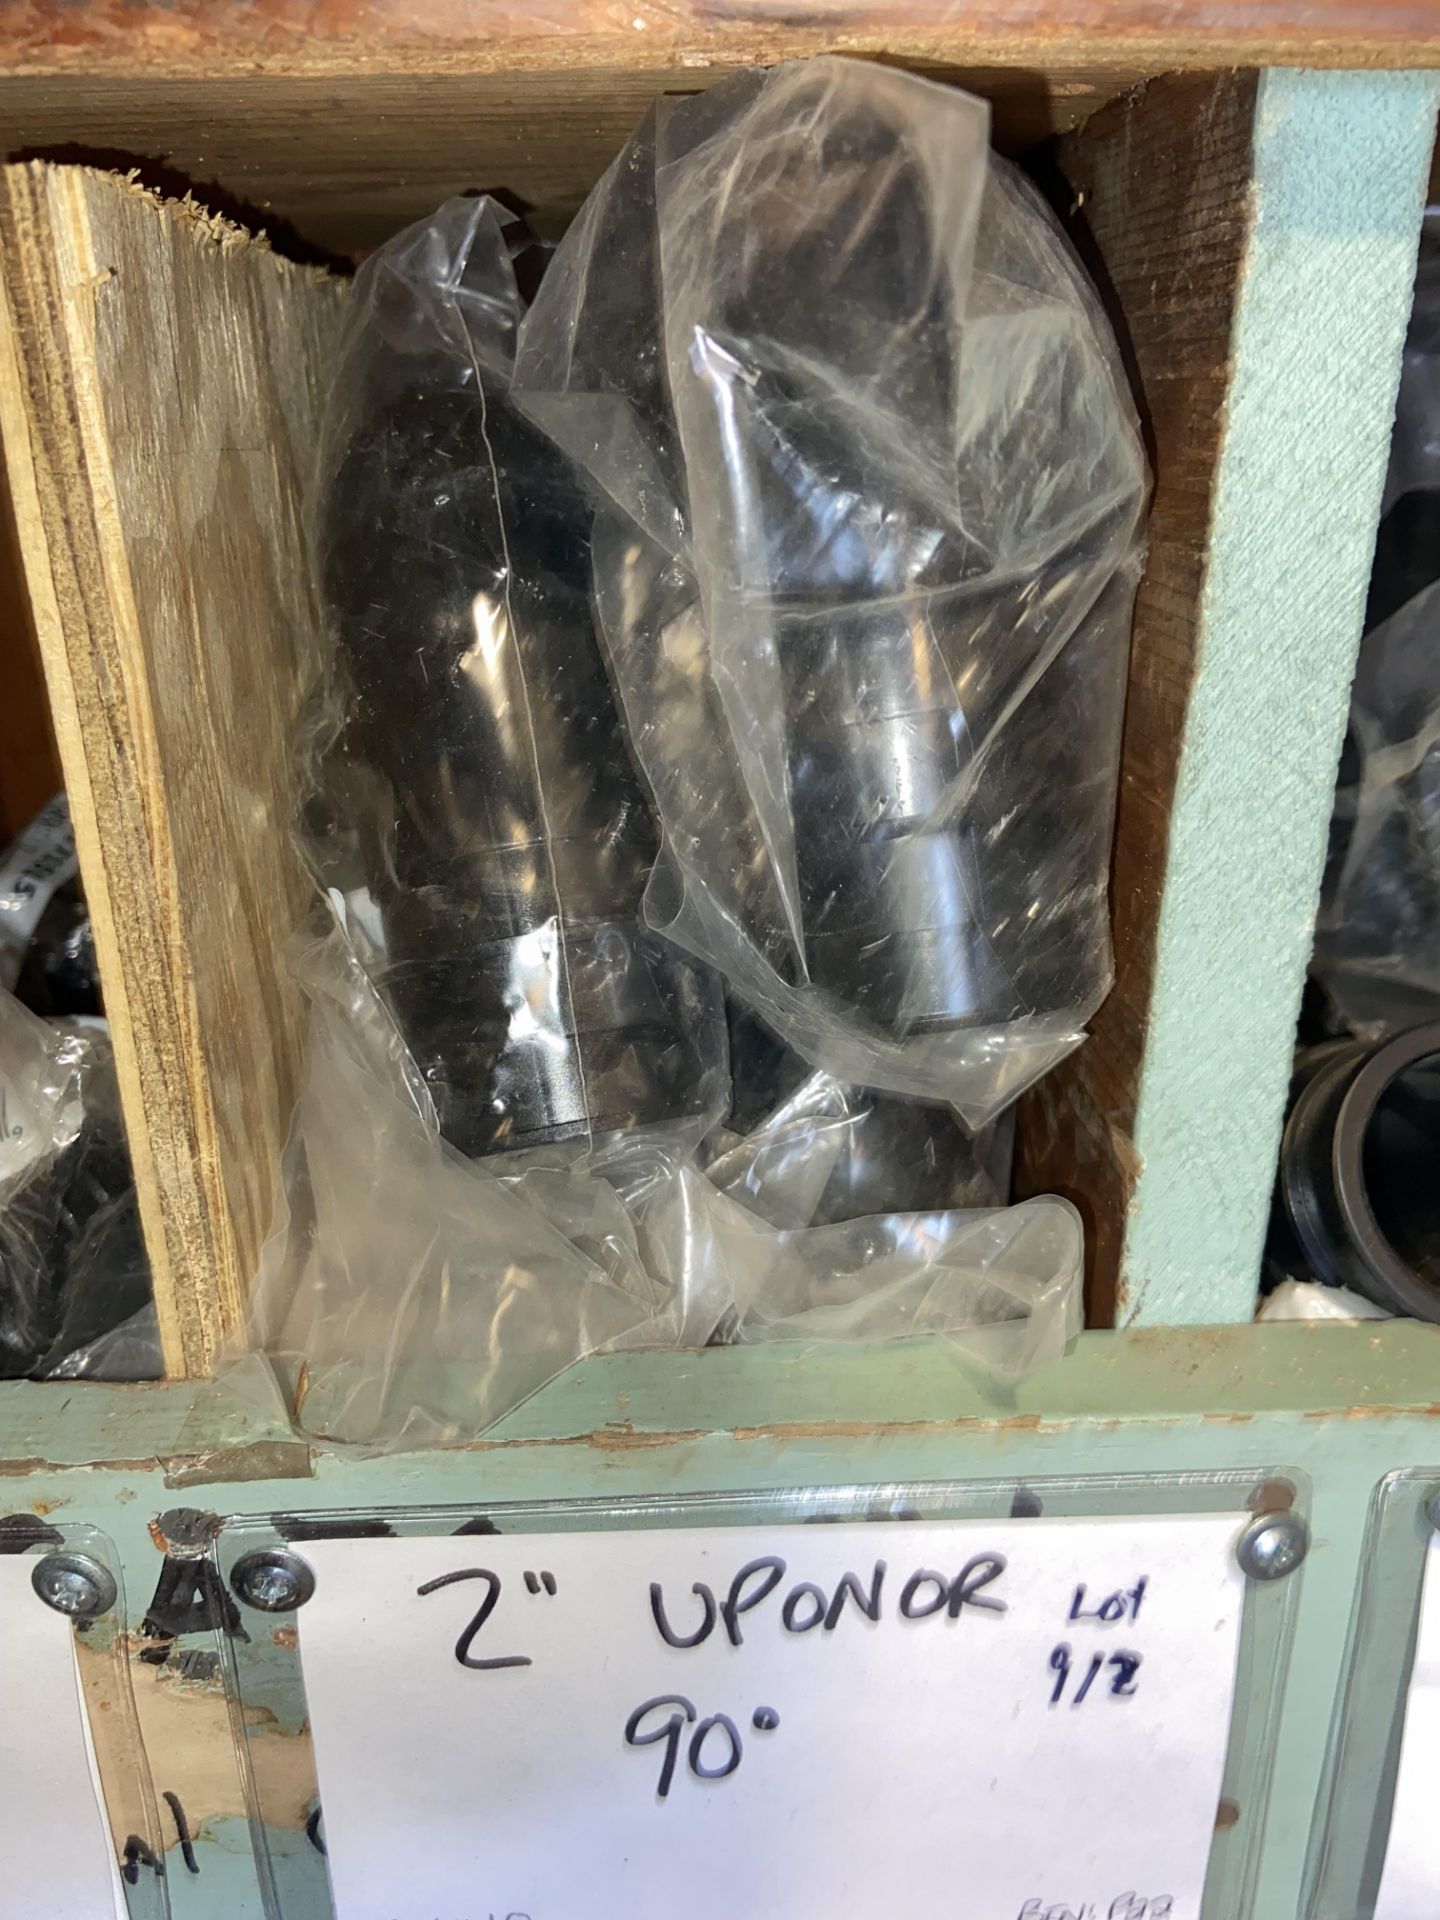 Uponor Reducer 1 1/2" x 3/4" (3) 1 1/2" x 1" (13) 1 1/2" x 1 1/4" (8) (LOCATED IN MONROEVILLE, PA)